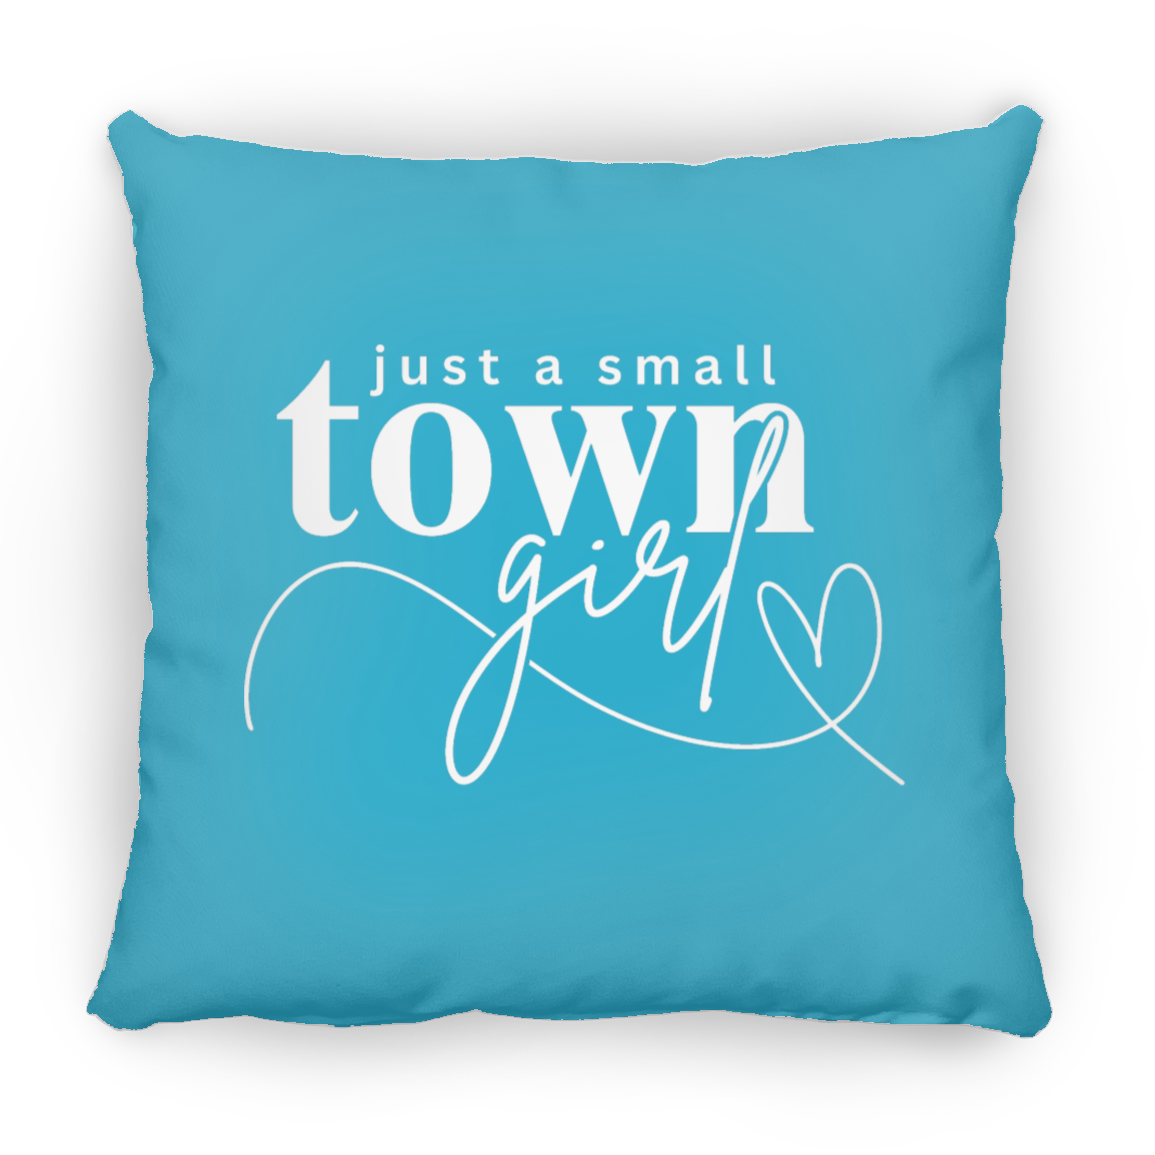 Small Square Pillow 14x14, Just a Small Town Girl, White Print